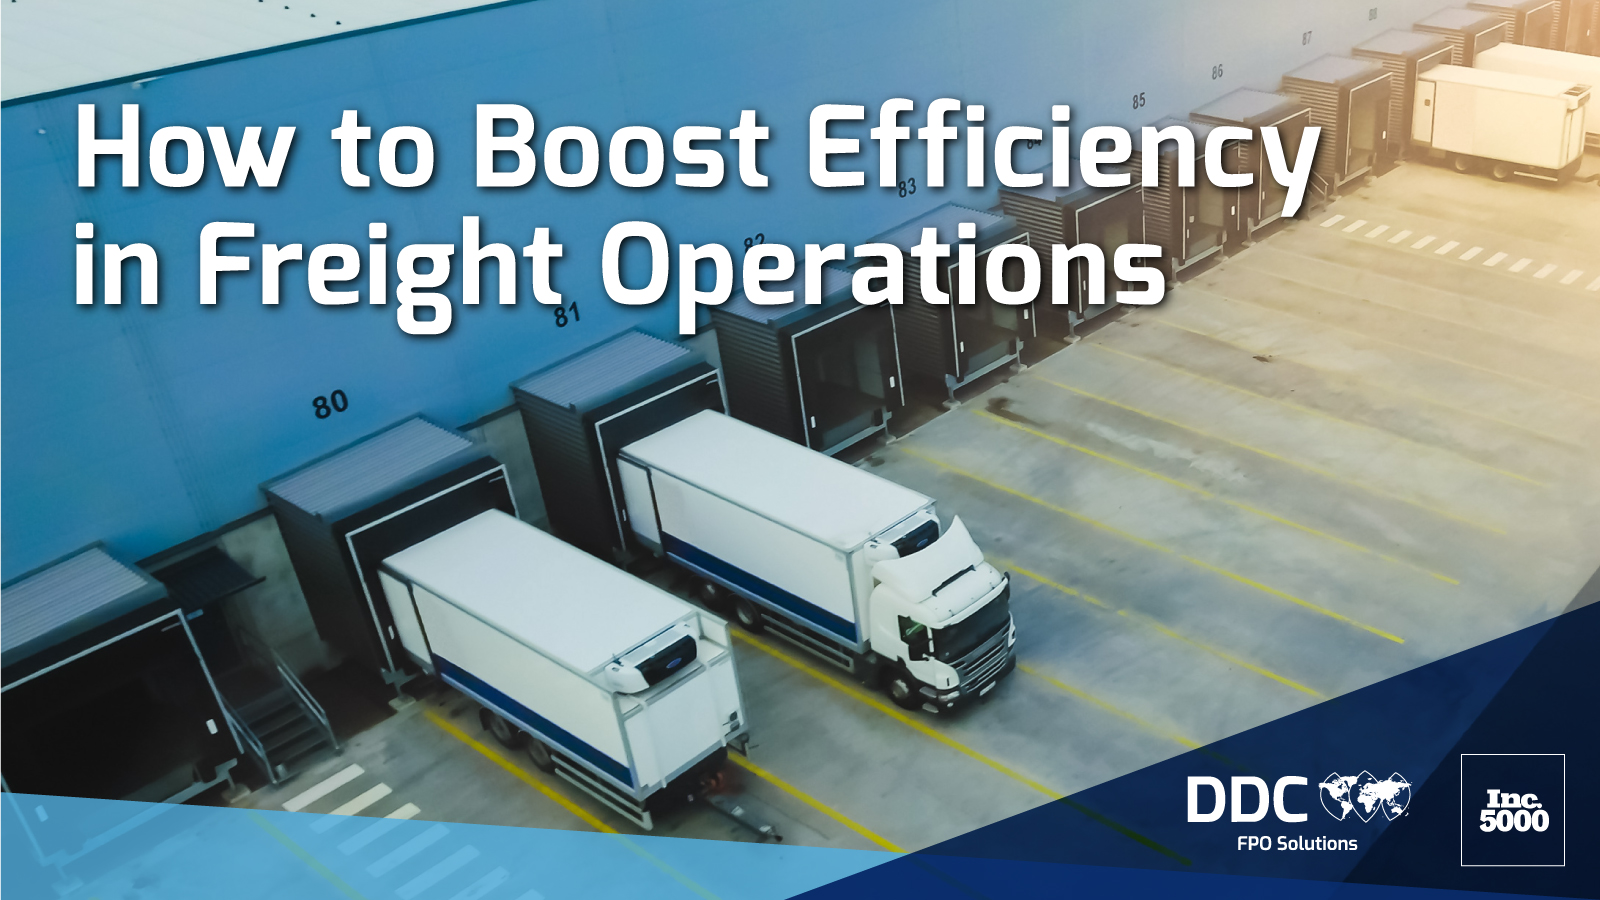 How to Boost Efficiency in Freight Operations